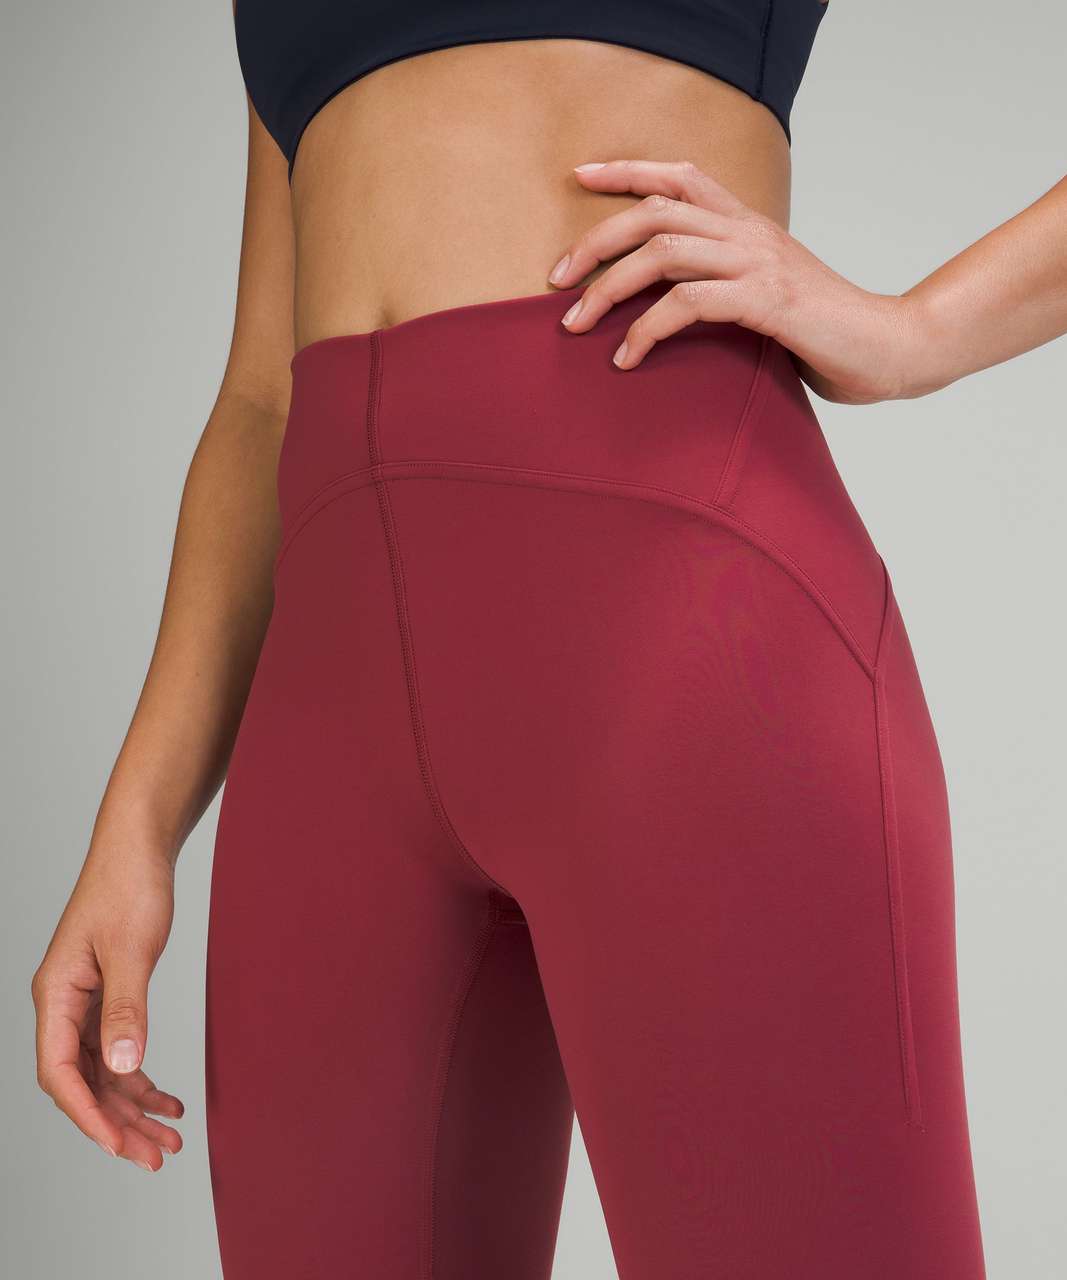 NWT Lululemon Instill High-Rise Tight 25 Mulled Wine Size 6 LW5DJTS-MLWI